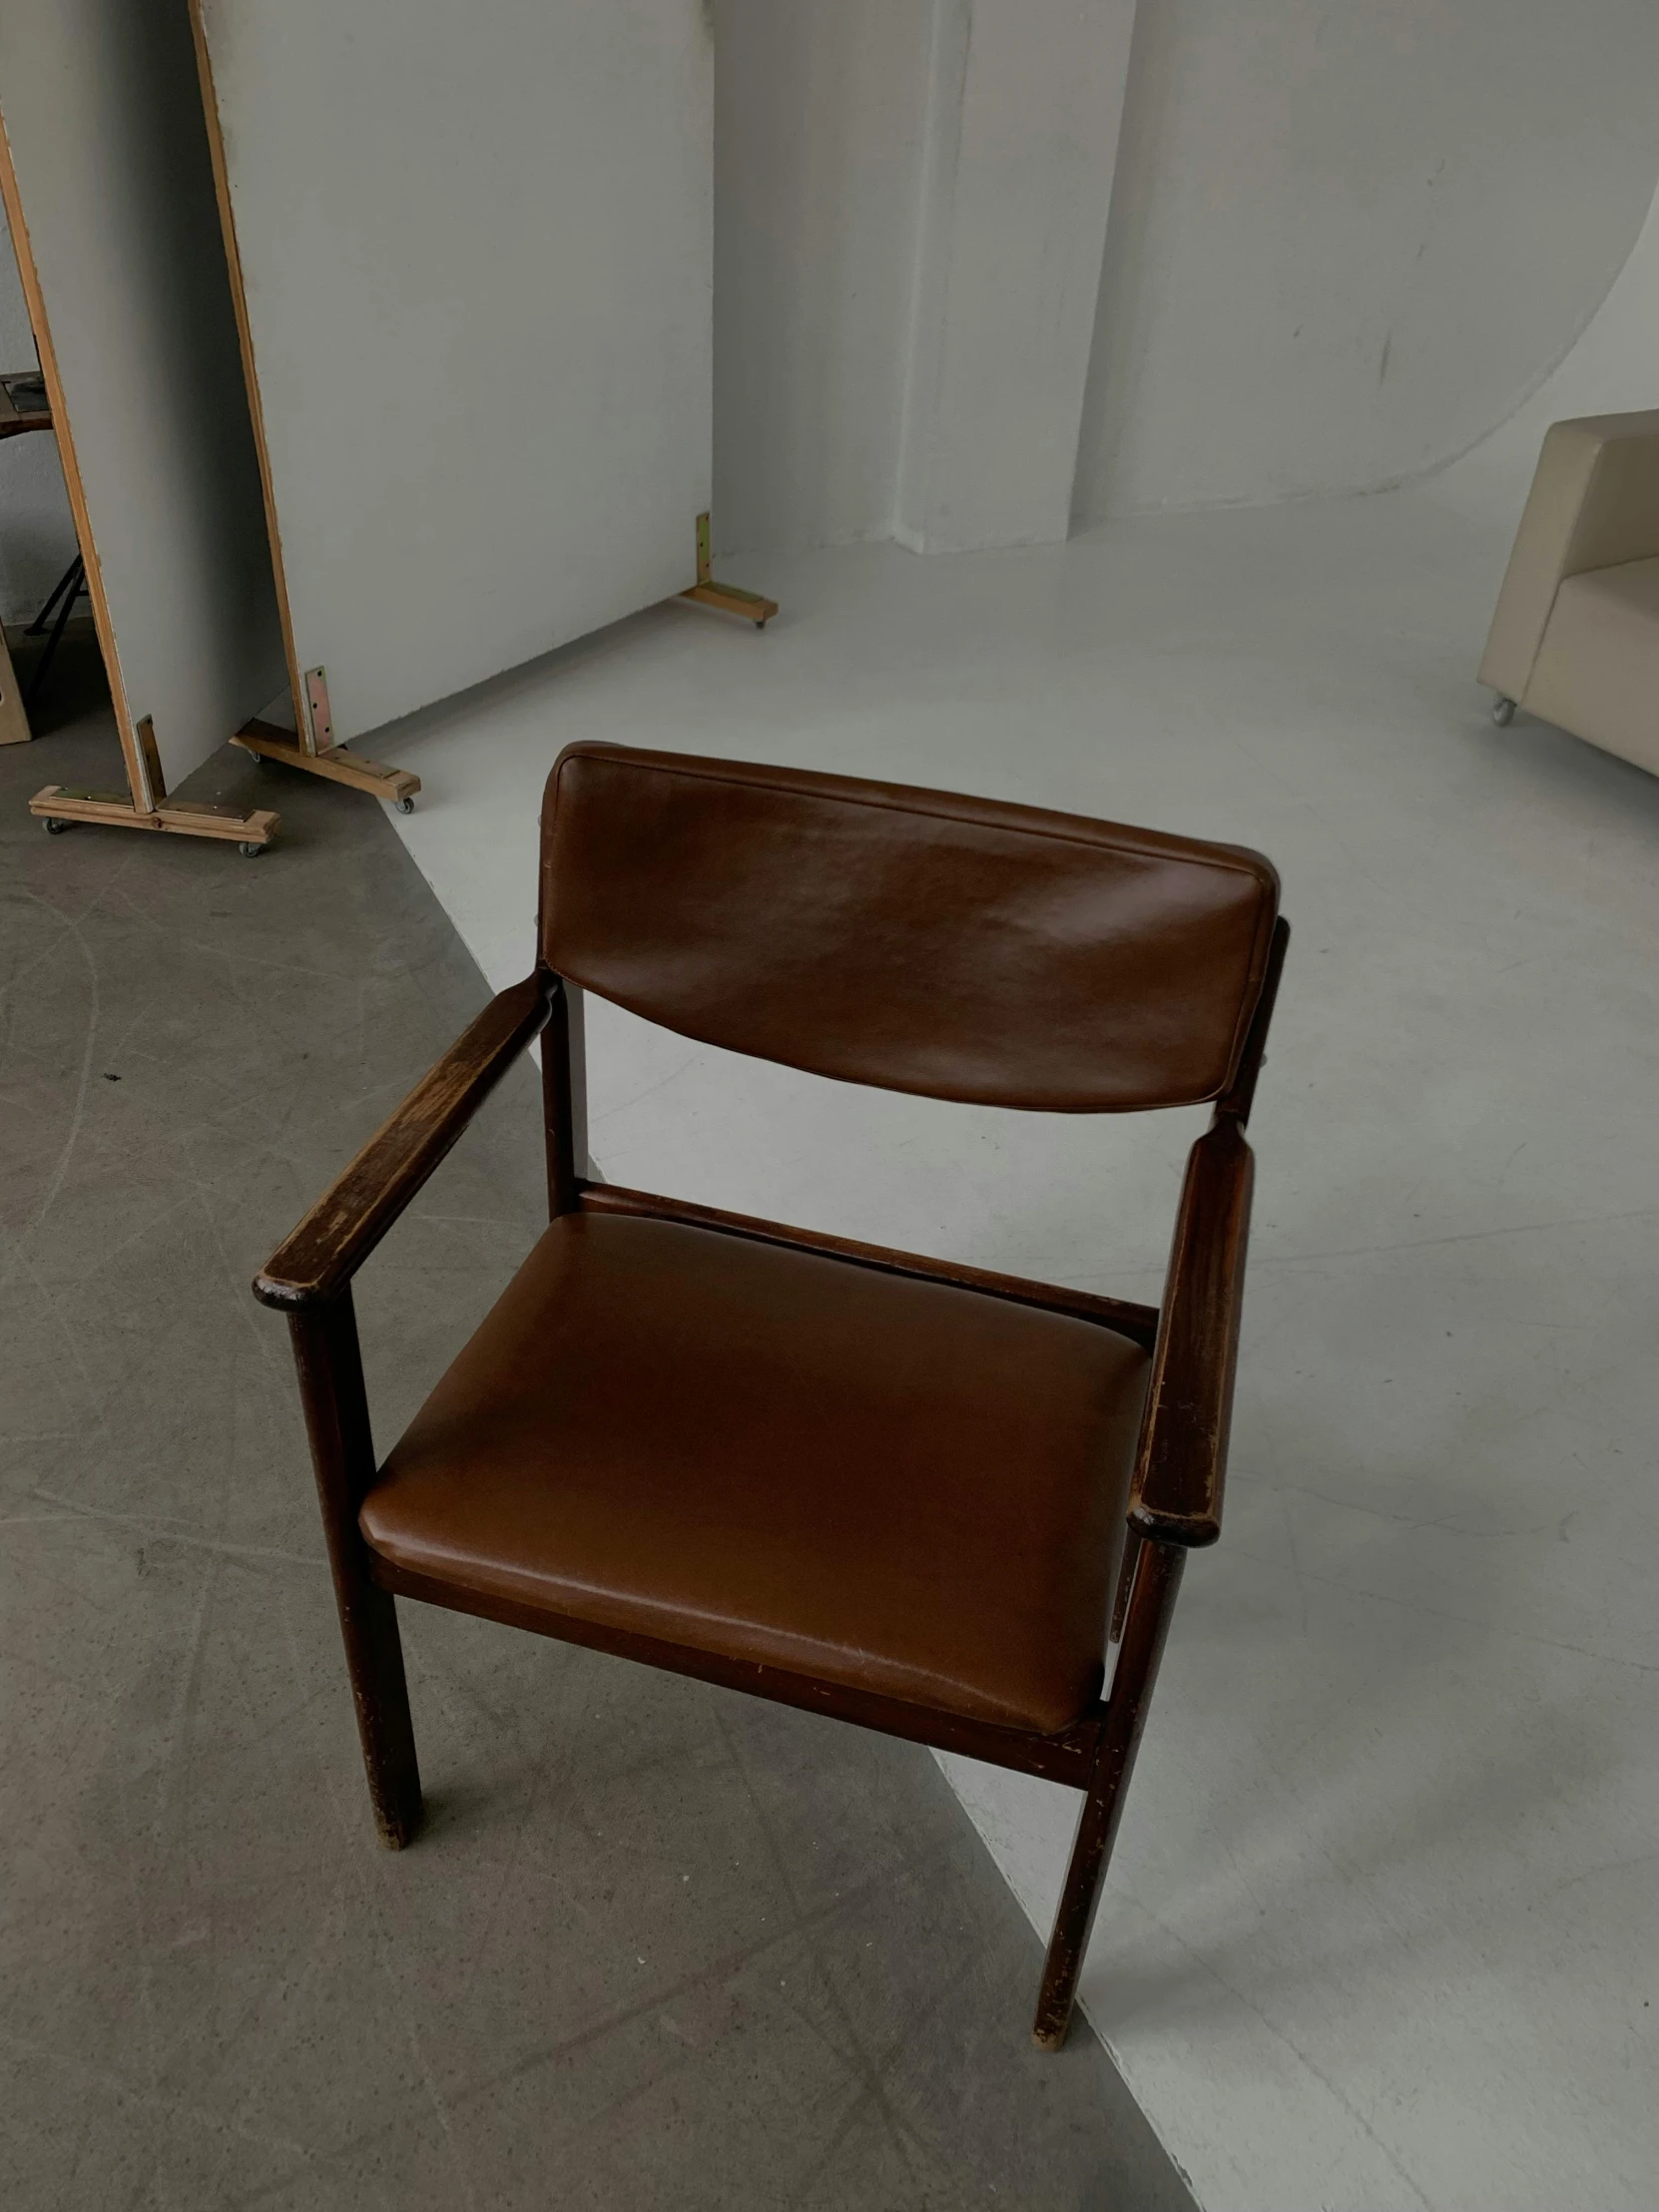 a brown leather chair with a wooden arm rest in an empty room